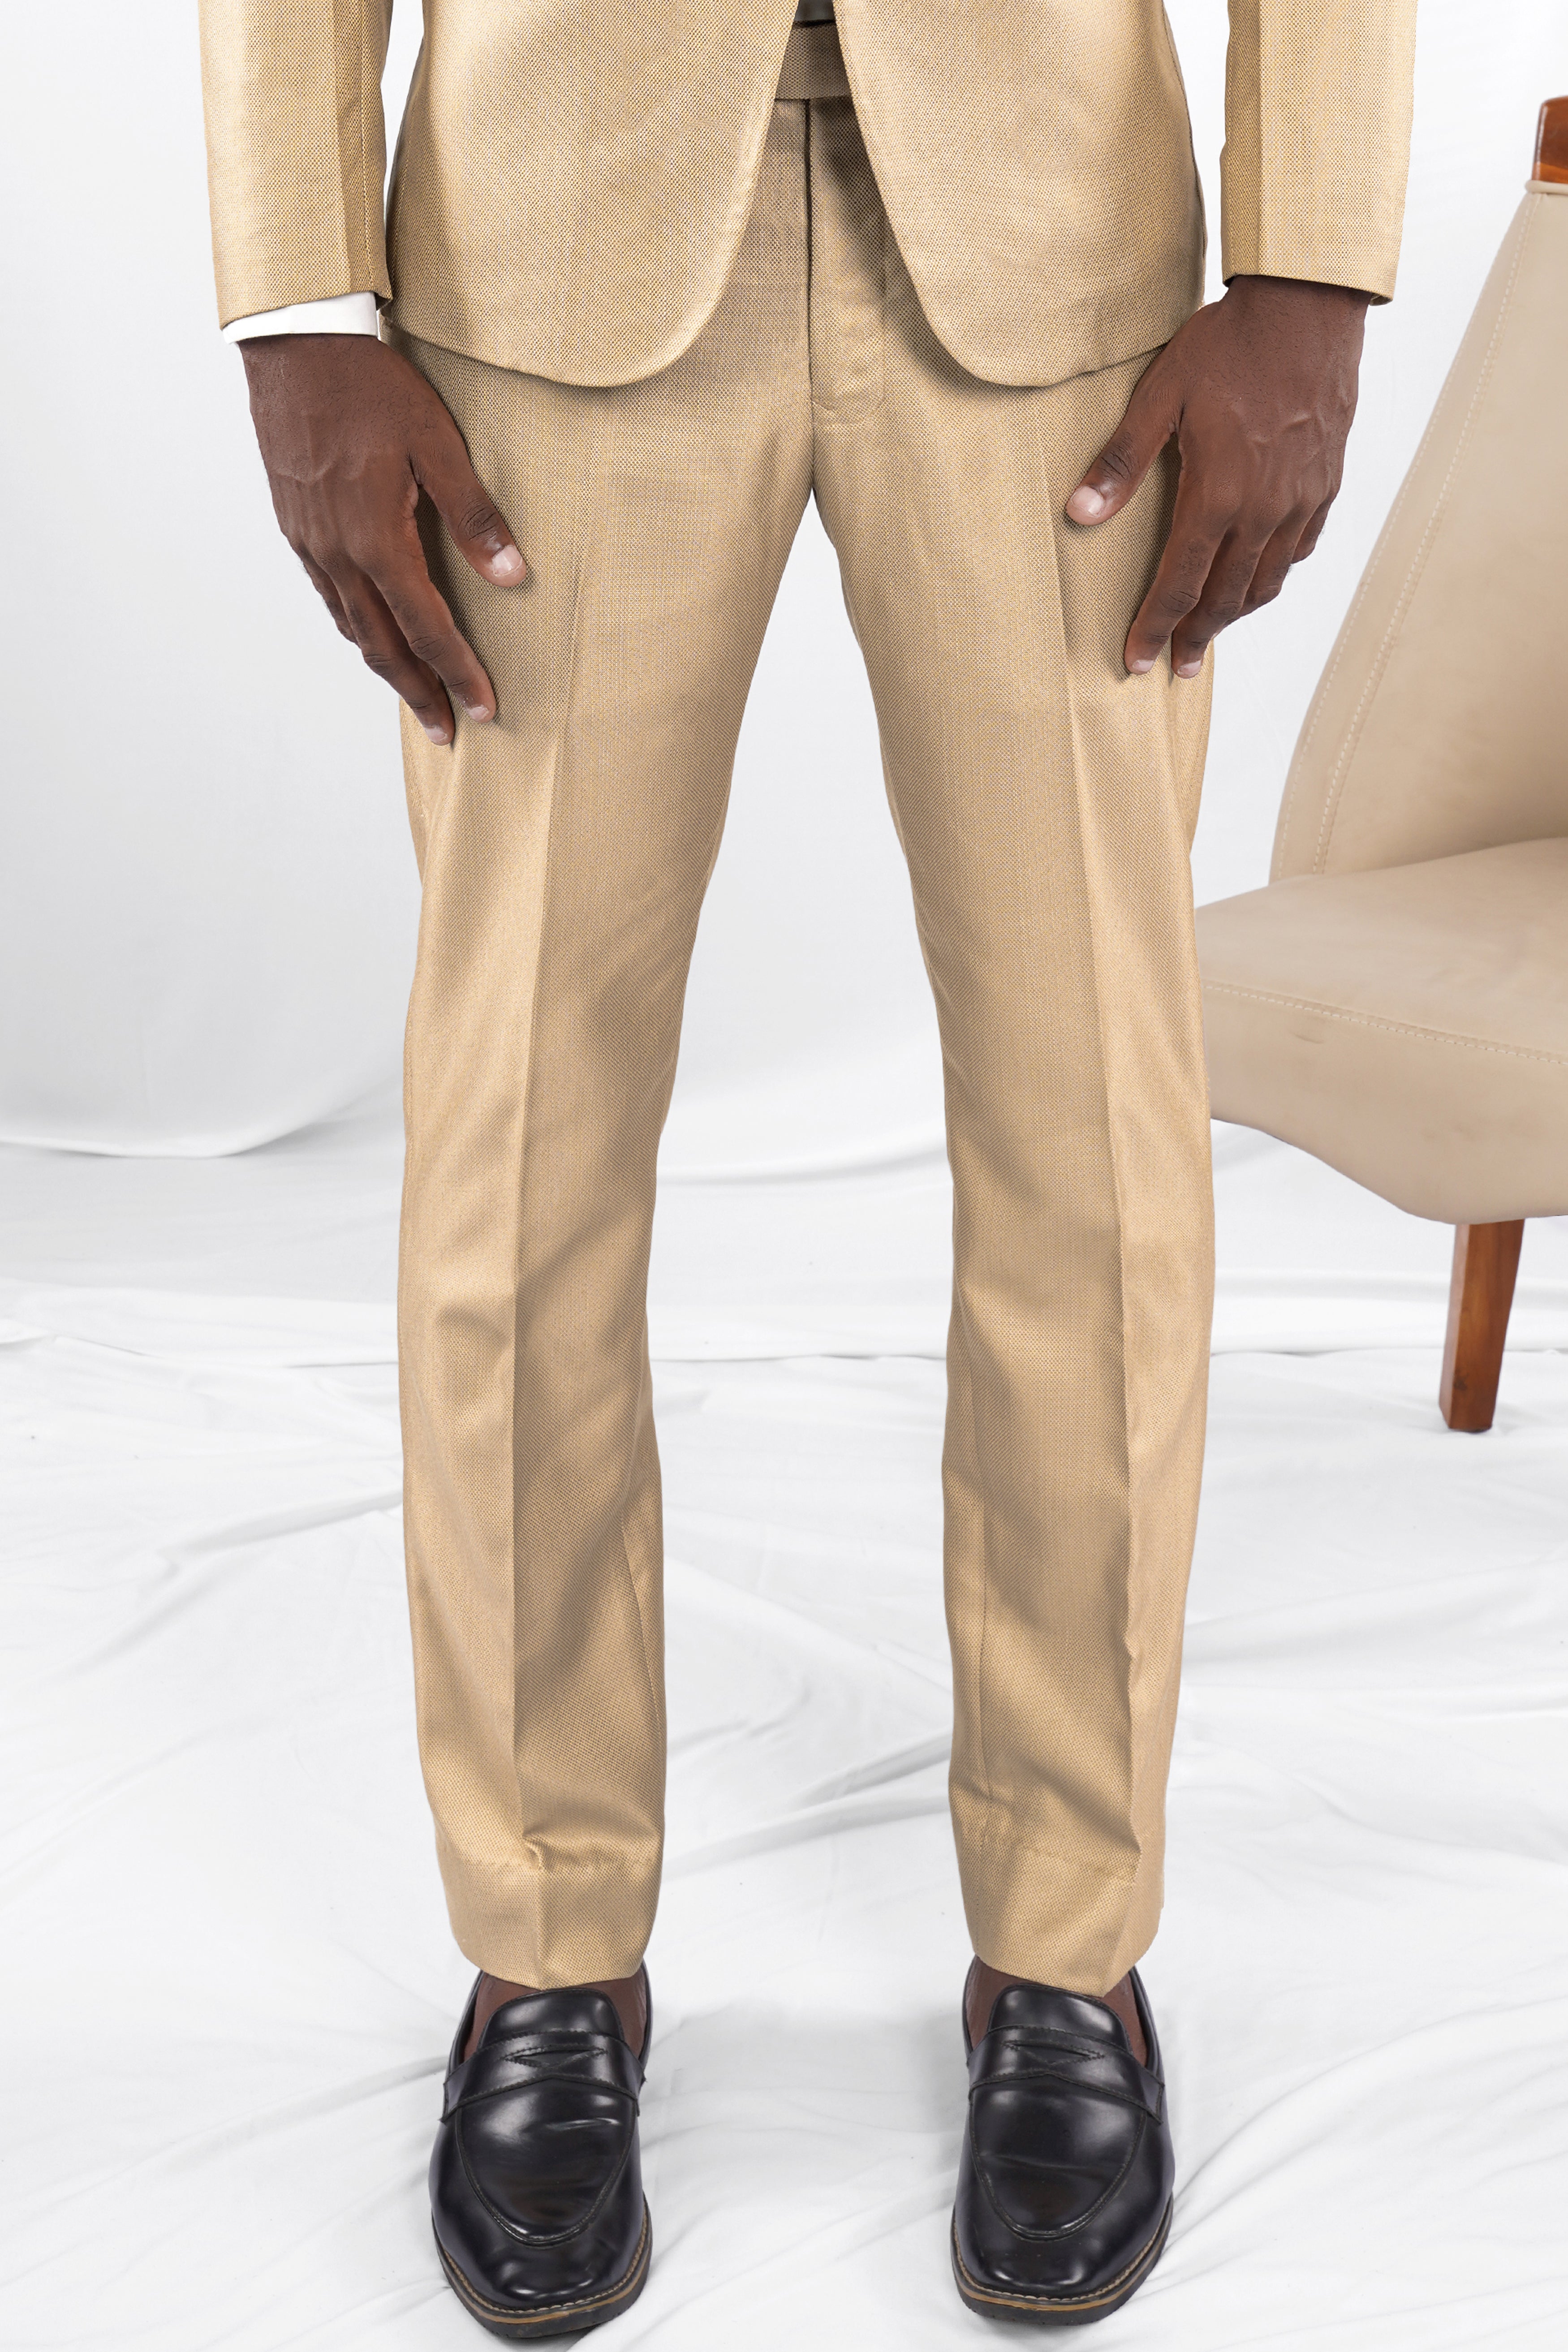 Thistle Brown Dobby Textured Pant T2713-28, T2713-30, T2713-32, T2713-34, T2713-36, T2713-38, T2713-40, T2713-42, T2713-44